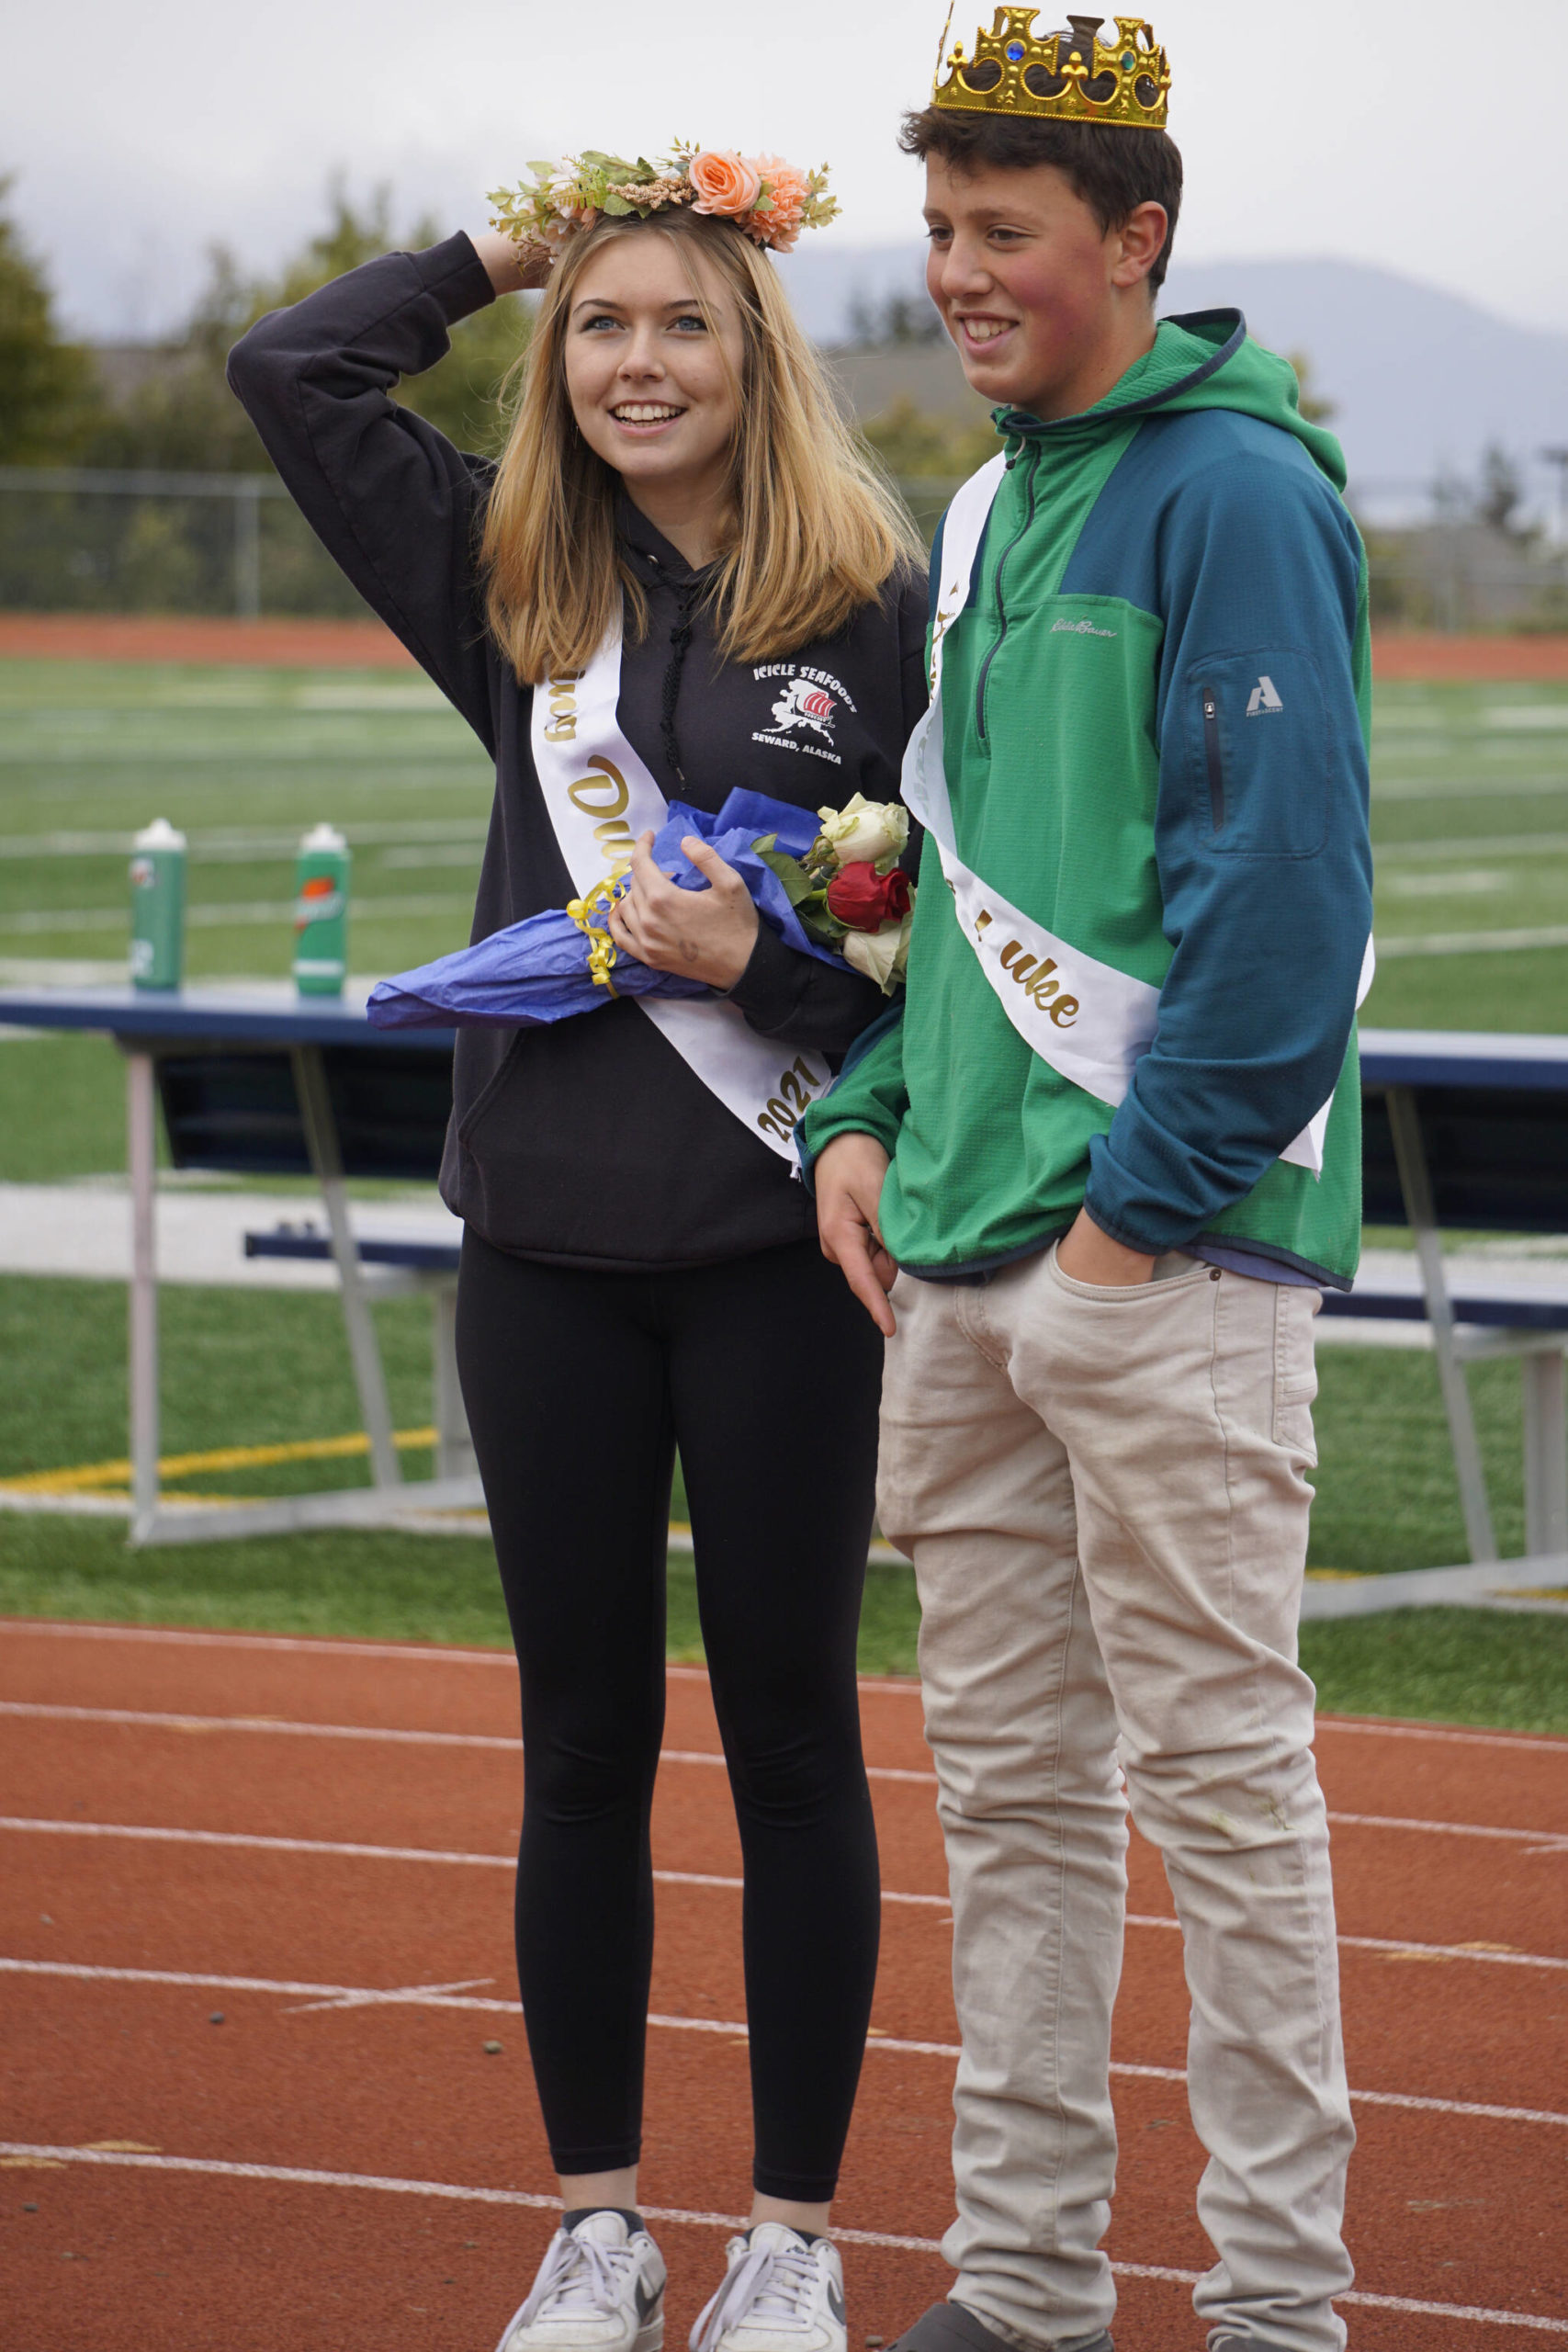 Sophomore class Duchess Minadora Reutov adjusts her crown as Duke Camden Wise watches at the Homer vs. Nikiski junior varsity football game on Saturday, Oct. 2, 2021, at Homer High School. (Photo by Michael Armstrong/Homer News)